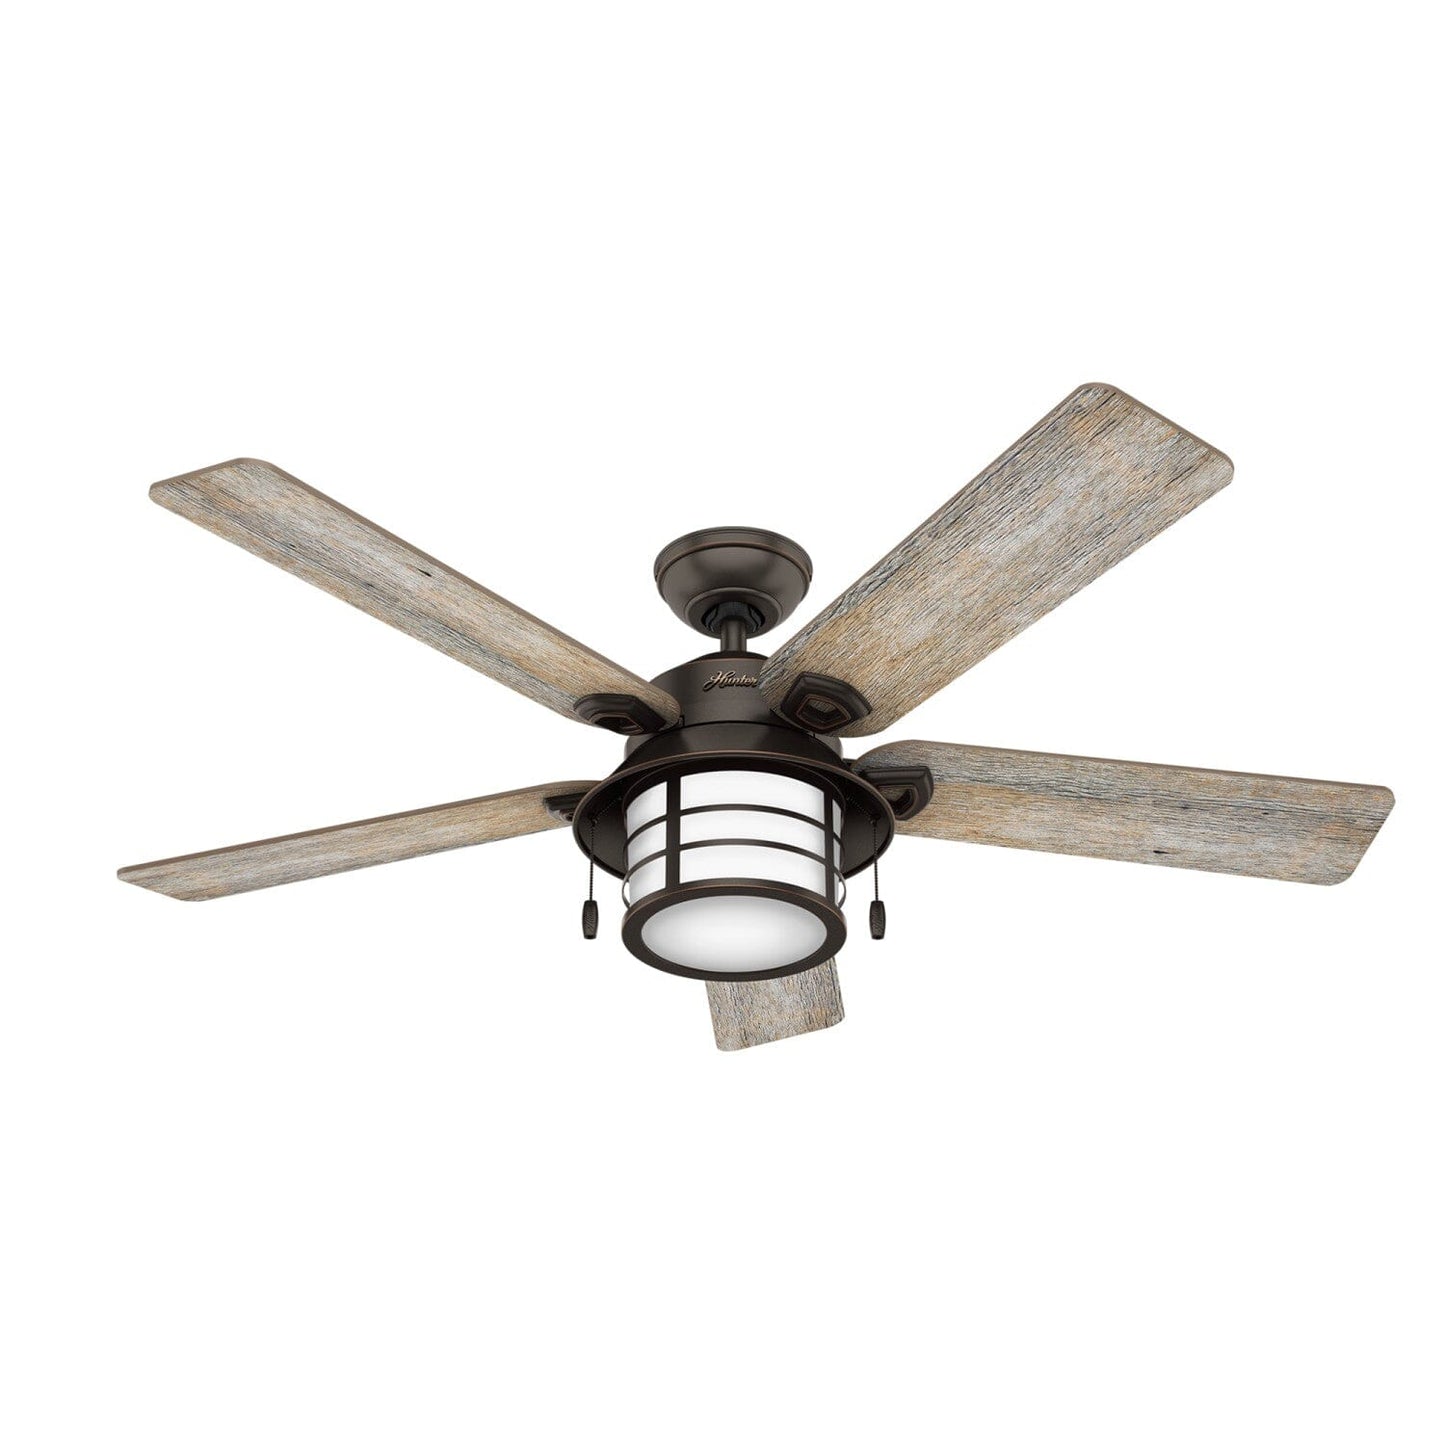 Key Biscayne Outdoor with Light 54 inch Ceiling Fans Hunter Onyx Bengal - Barnwood 